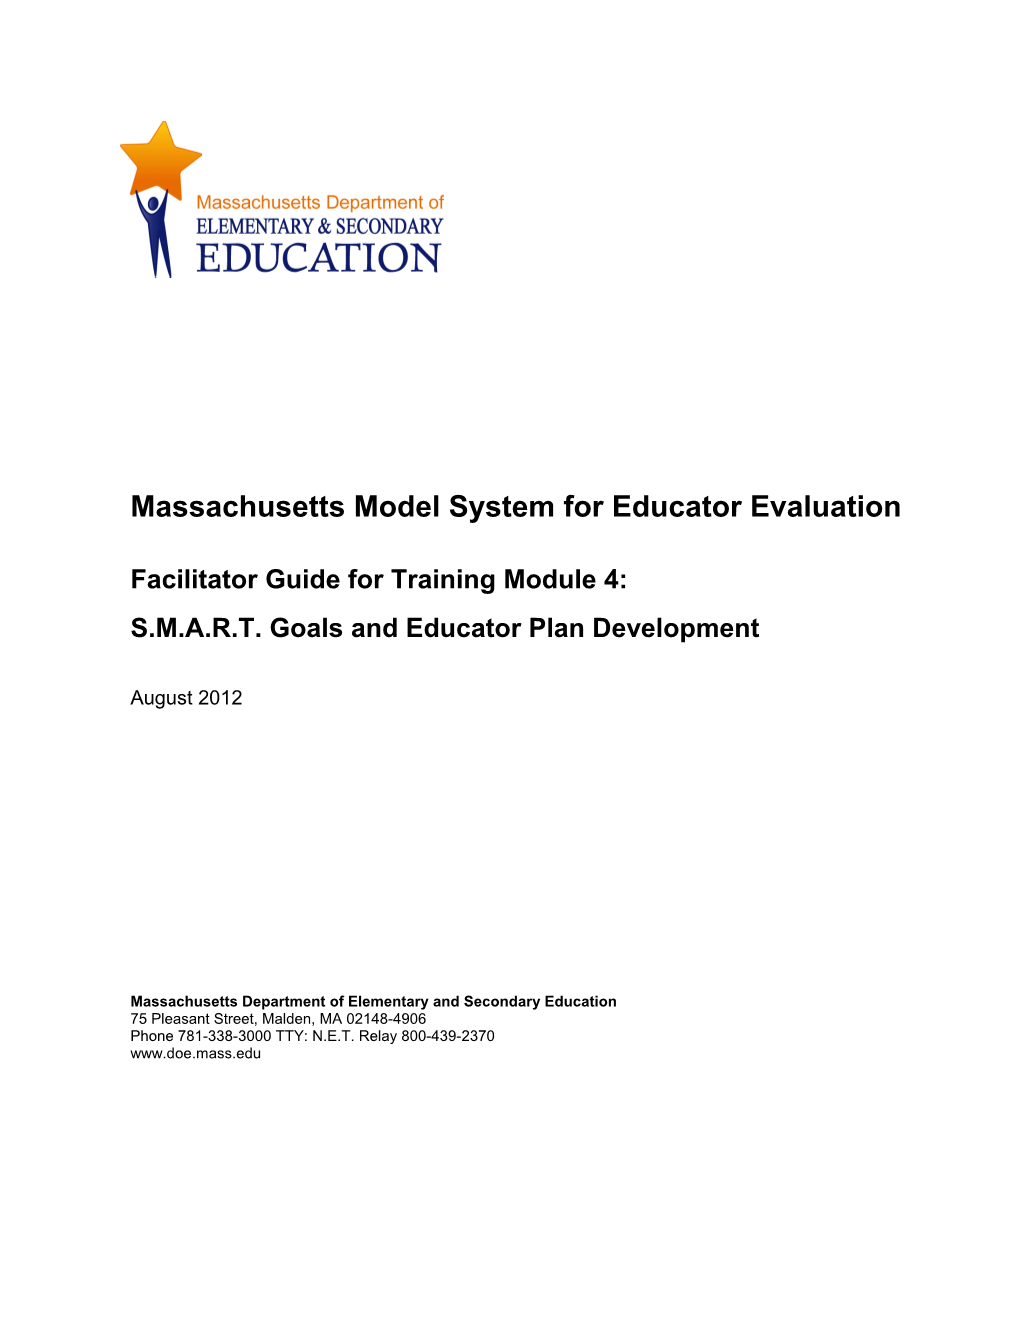 MA Model System Training Module 4: S.M.A.R.T. Goals and Educator Plan Development